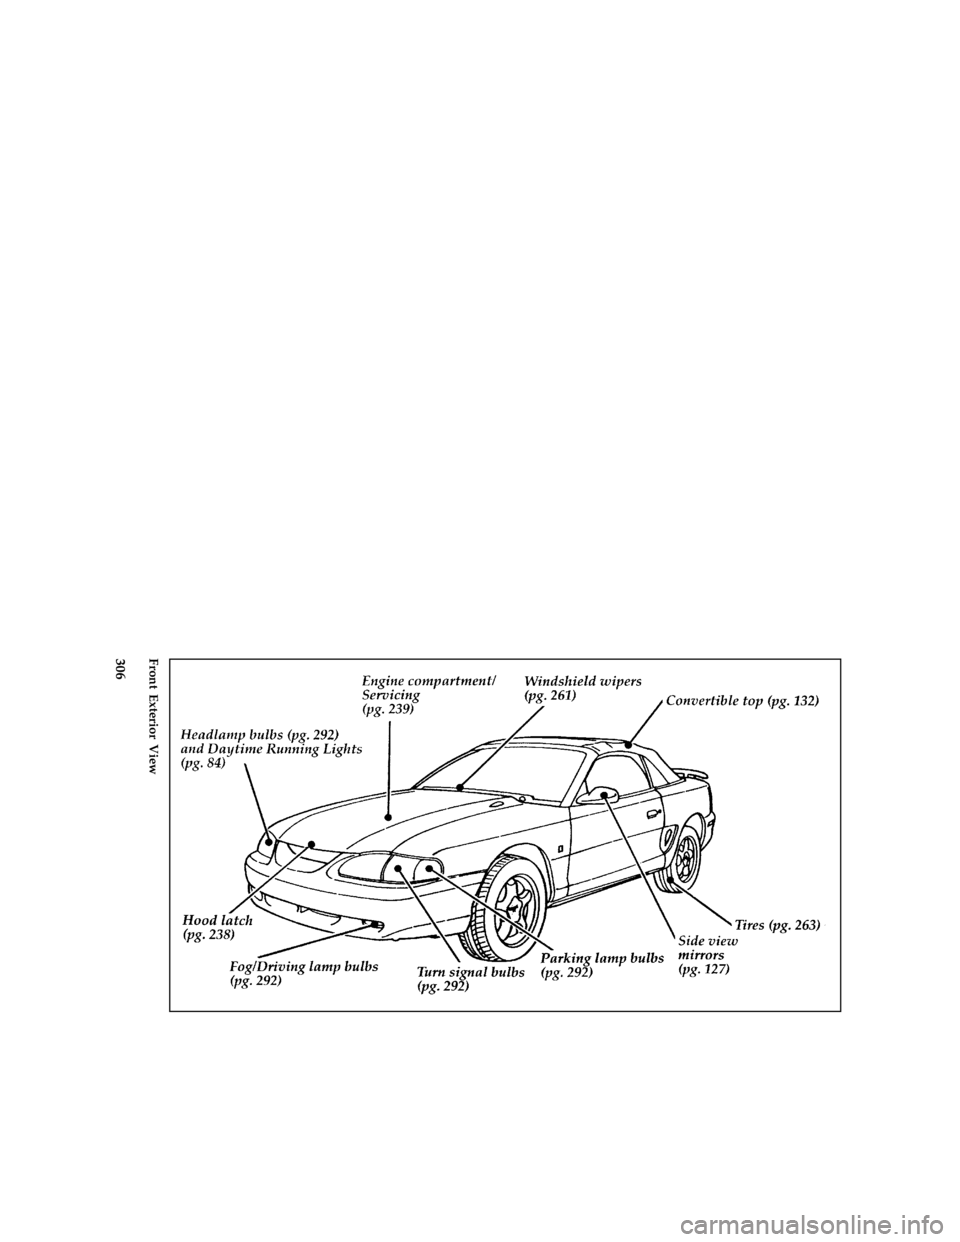 FORD MUSTANG 1996 4.G Owners Manual 306 [QI00500(M )05/95]
full page art:0011097-EFront Exterior View
File:16rcqim.ex
Update:Wed Mar 27 13:23:08 1996 